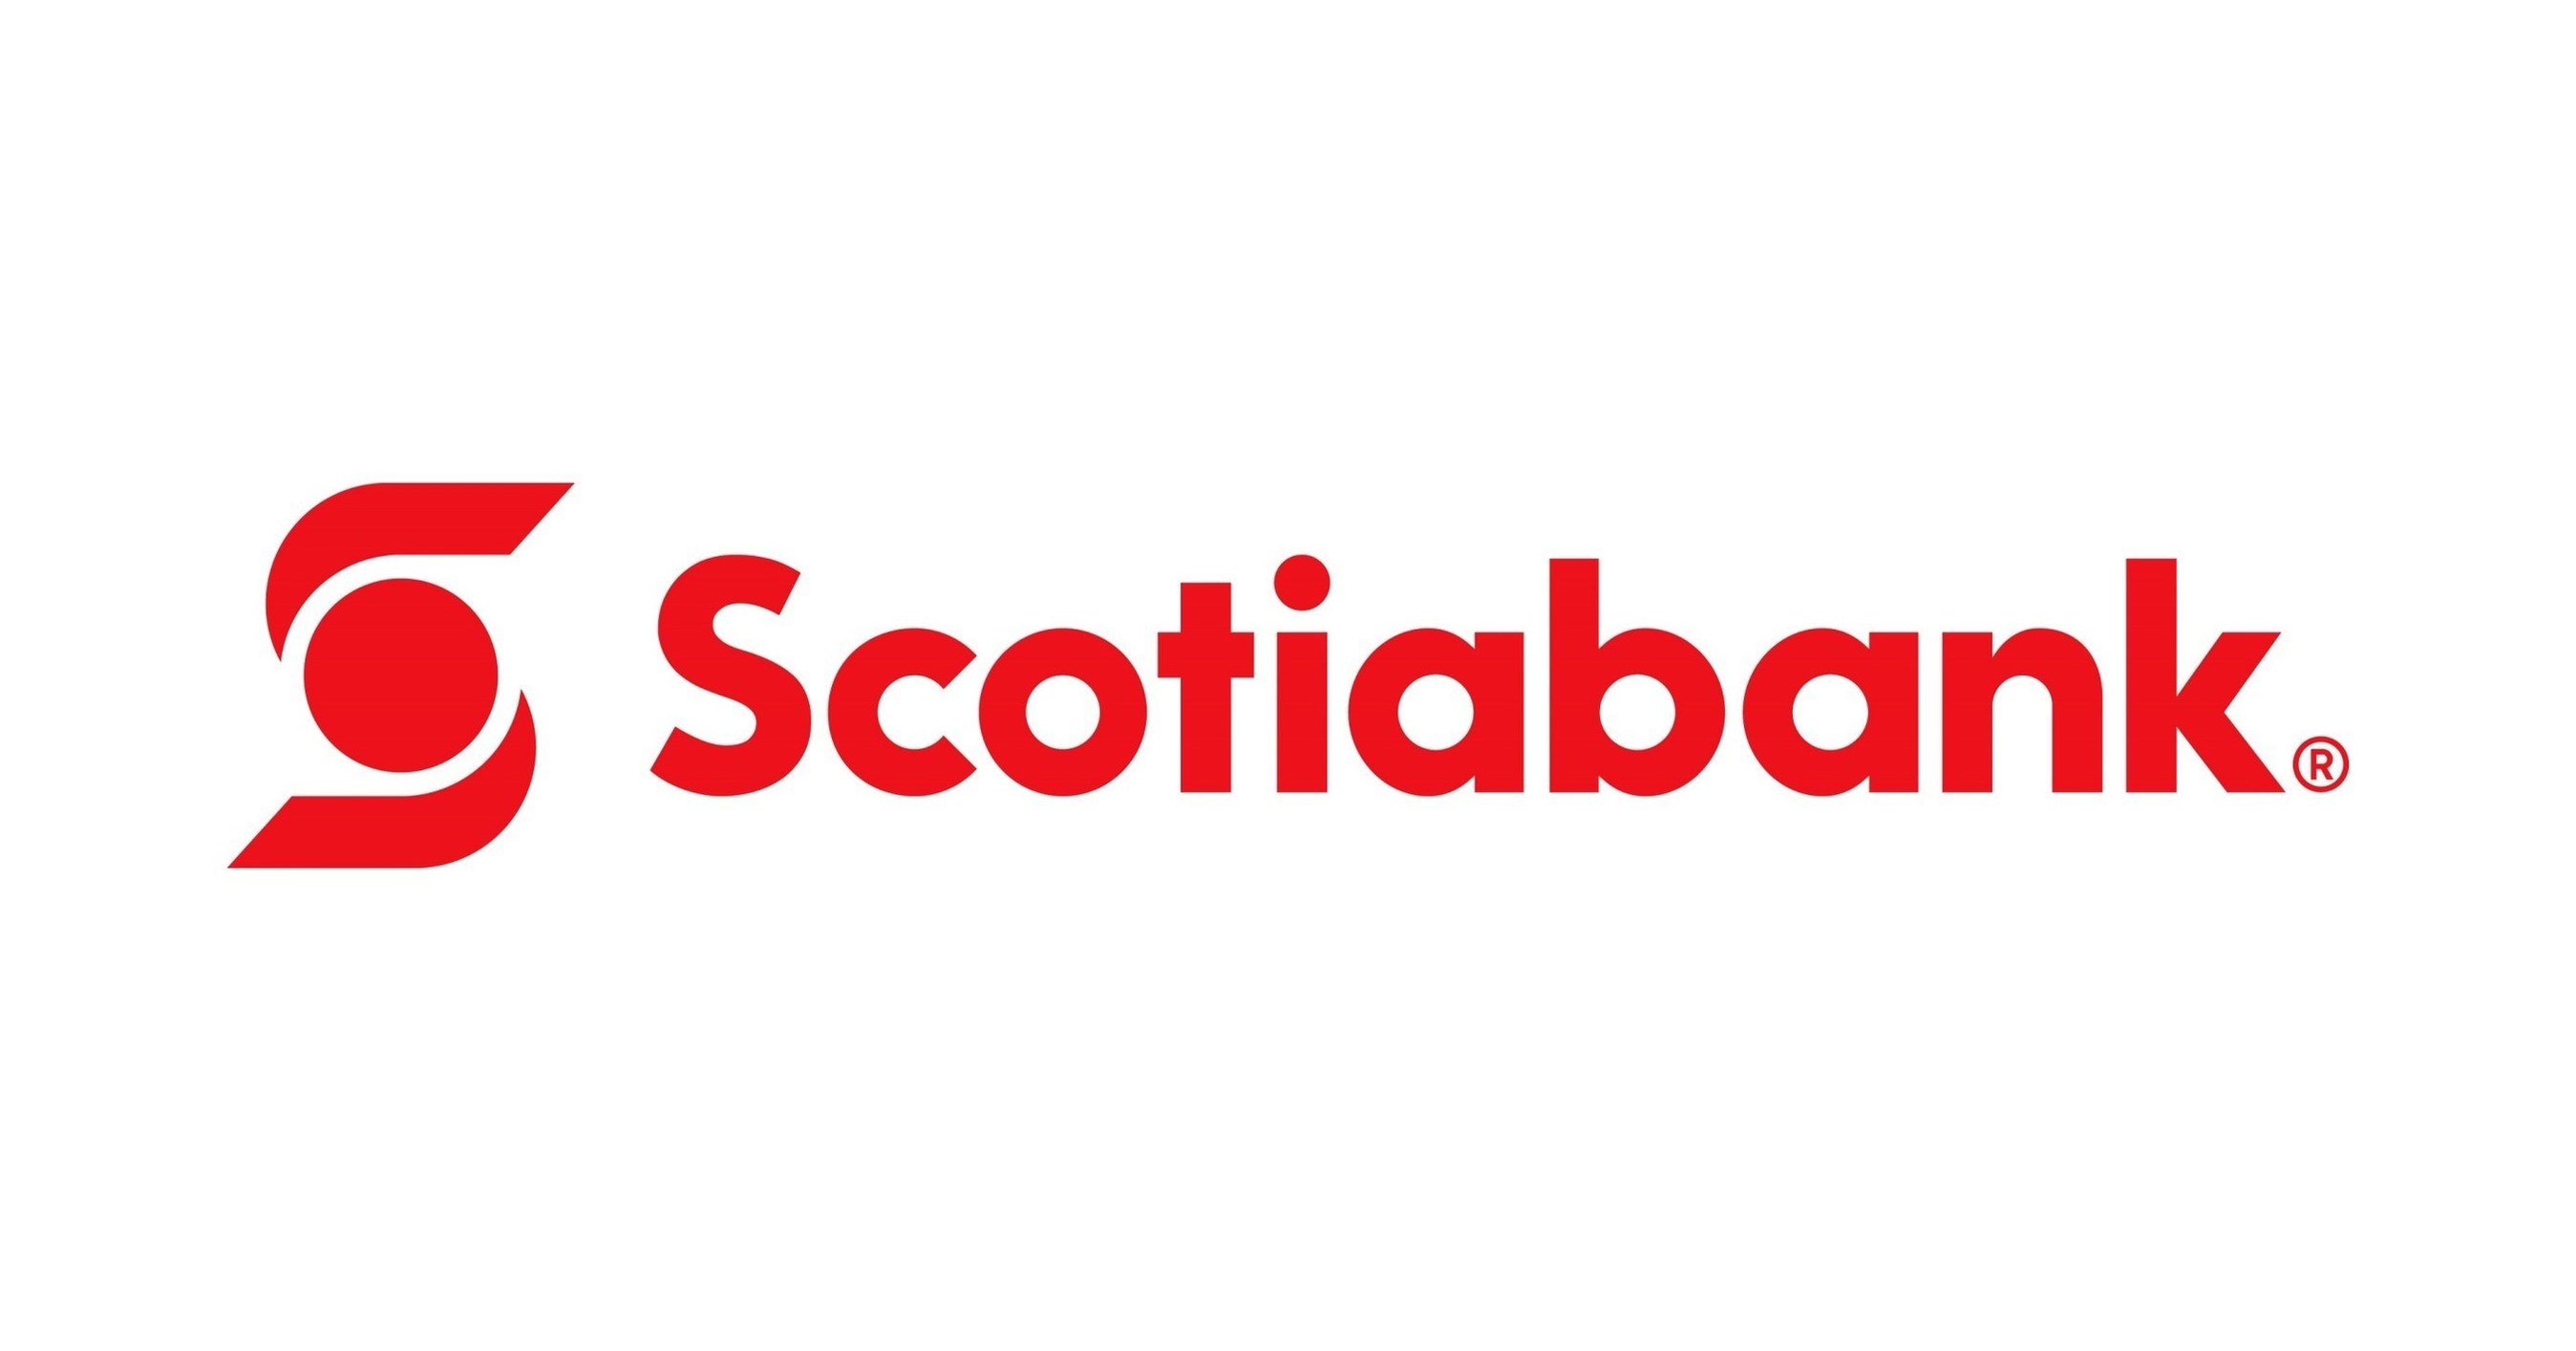 Scotiabank Ultimate Package Review: Pros and Cons in 2023